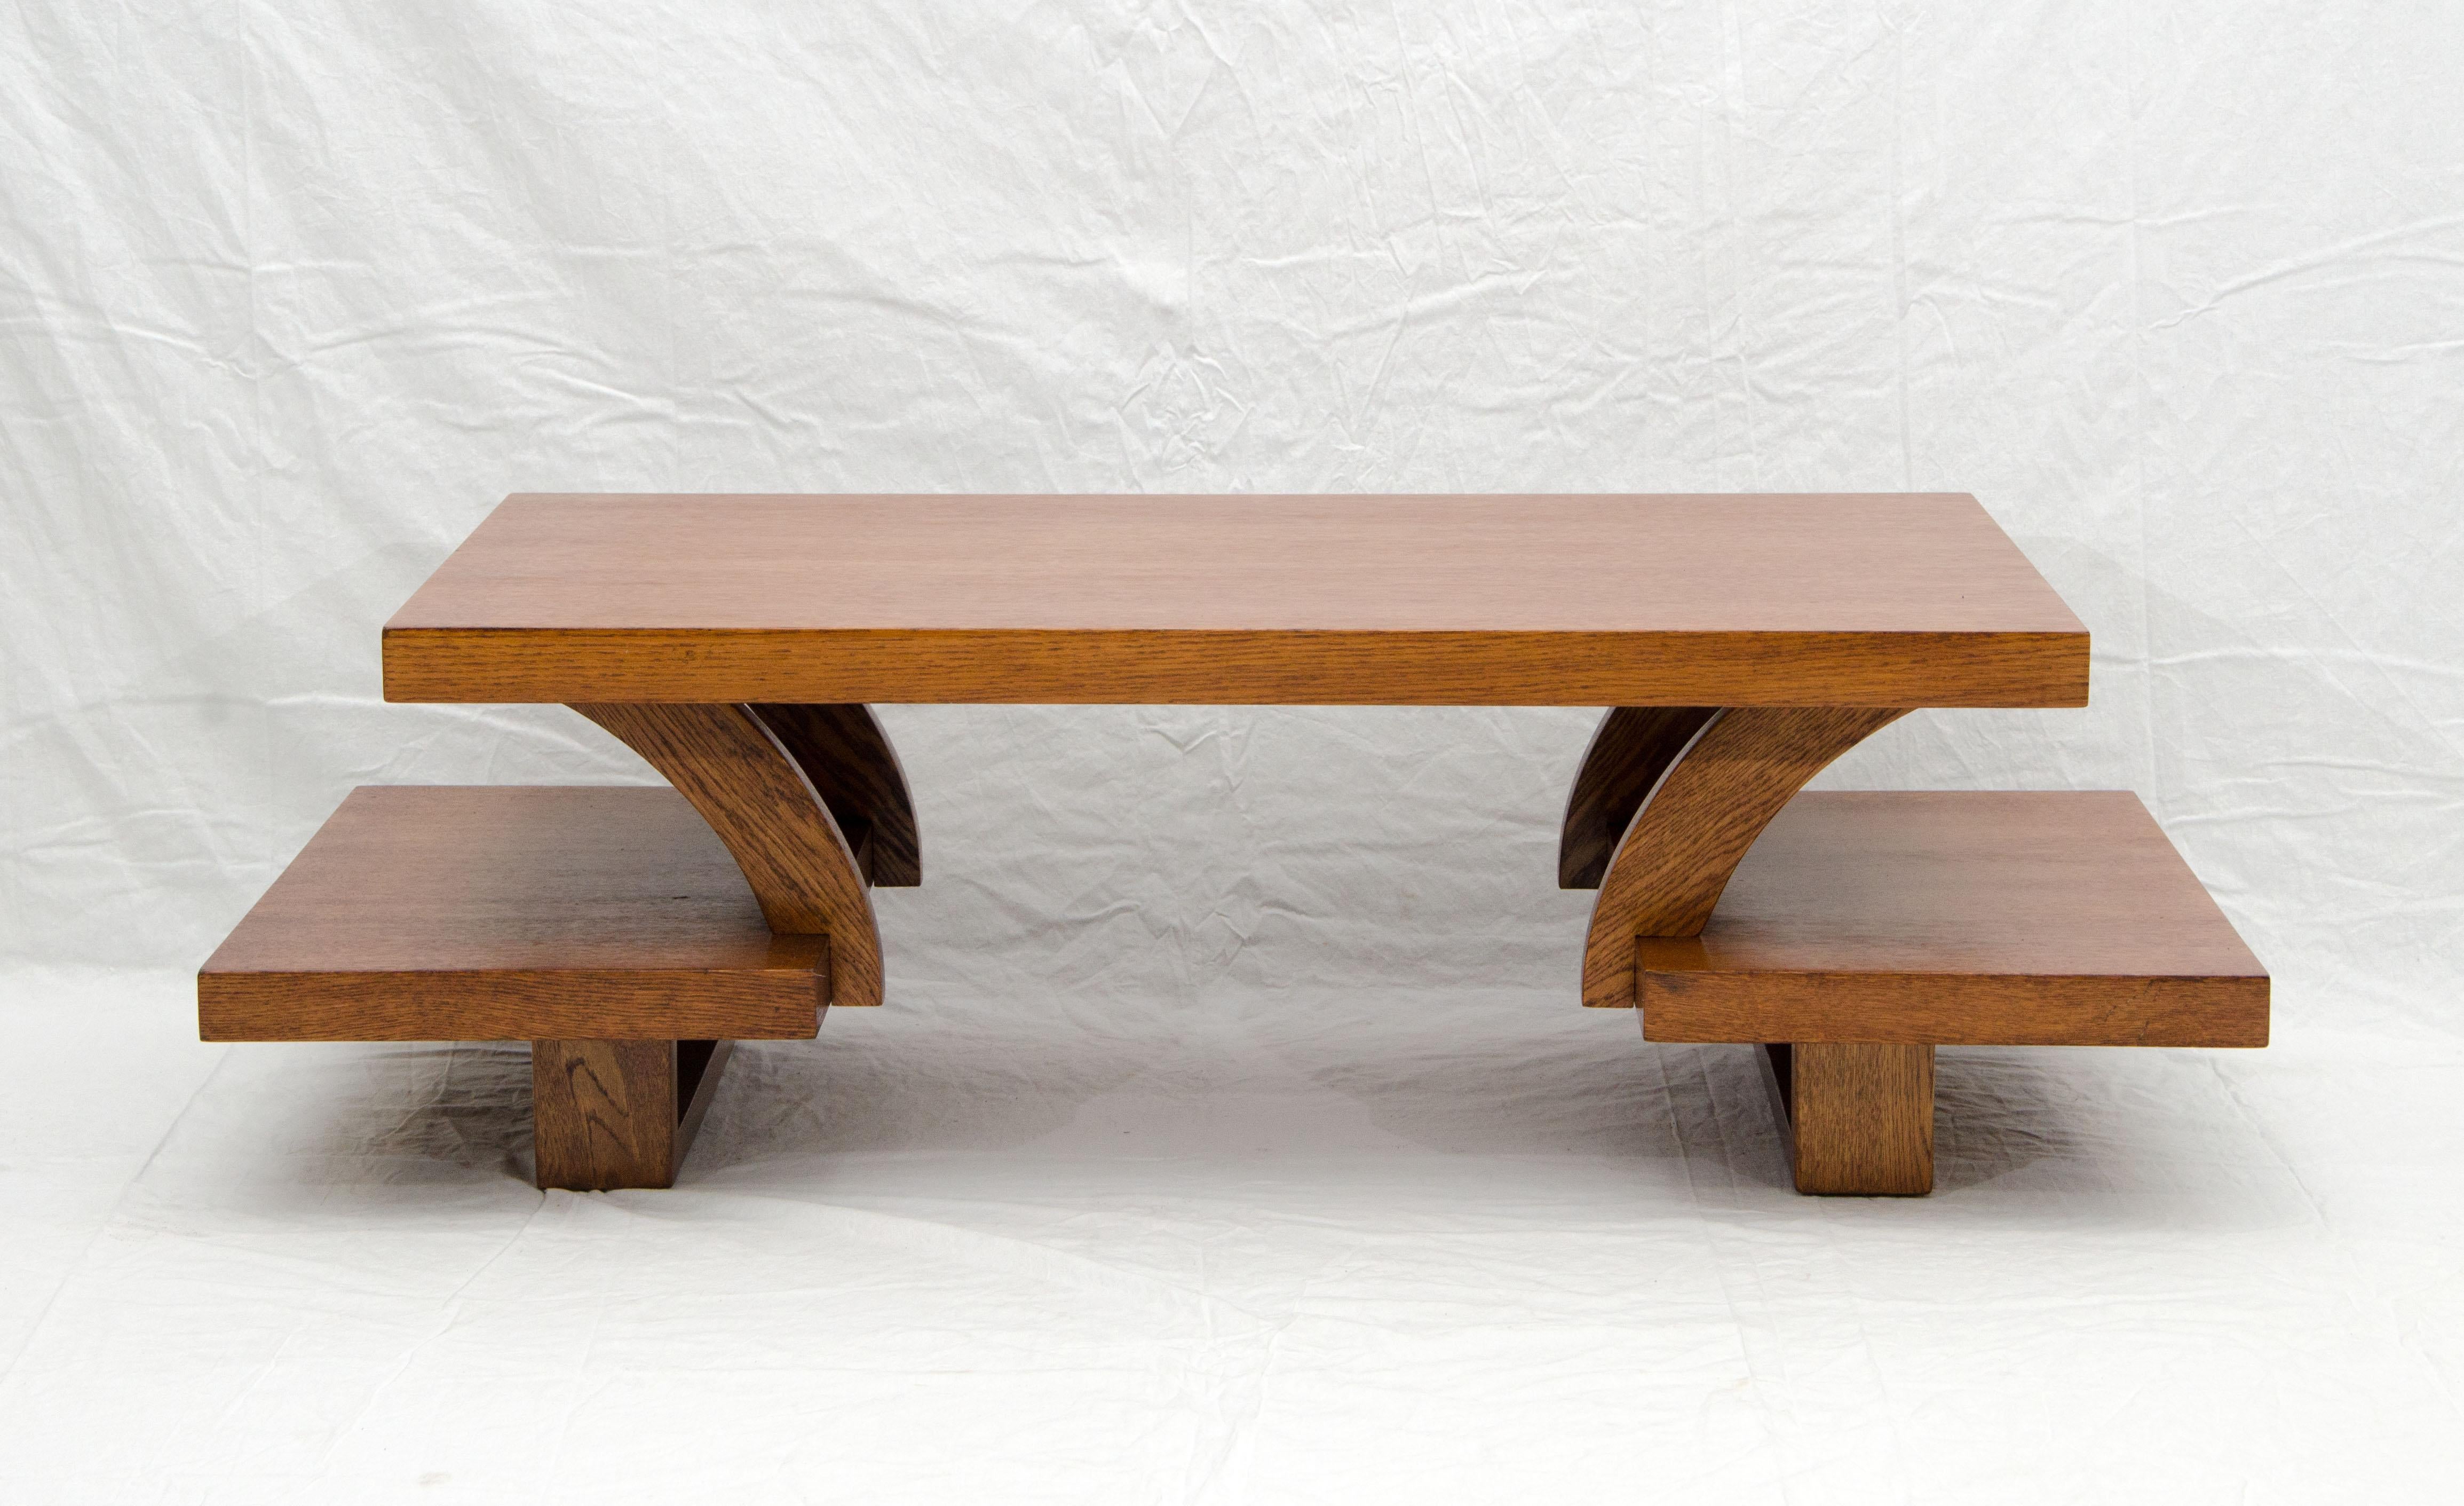 Interesting and unusual design for this 1950s oak coffee table with extended half shelves at both ends. The small shelves at each end are 7 1/4